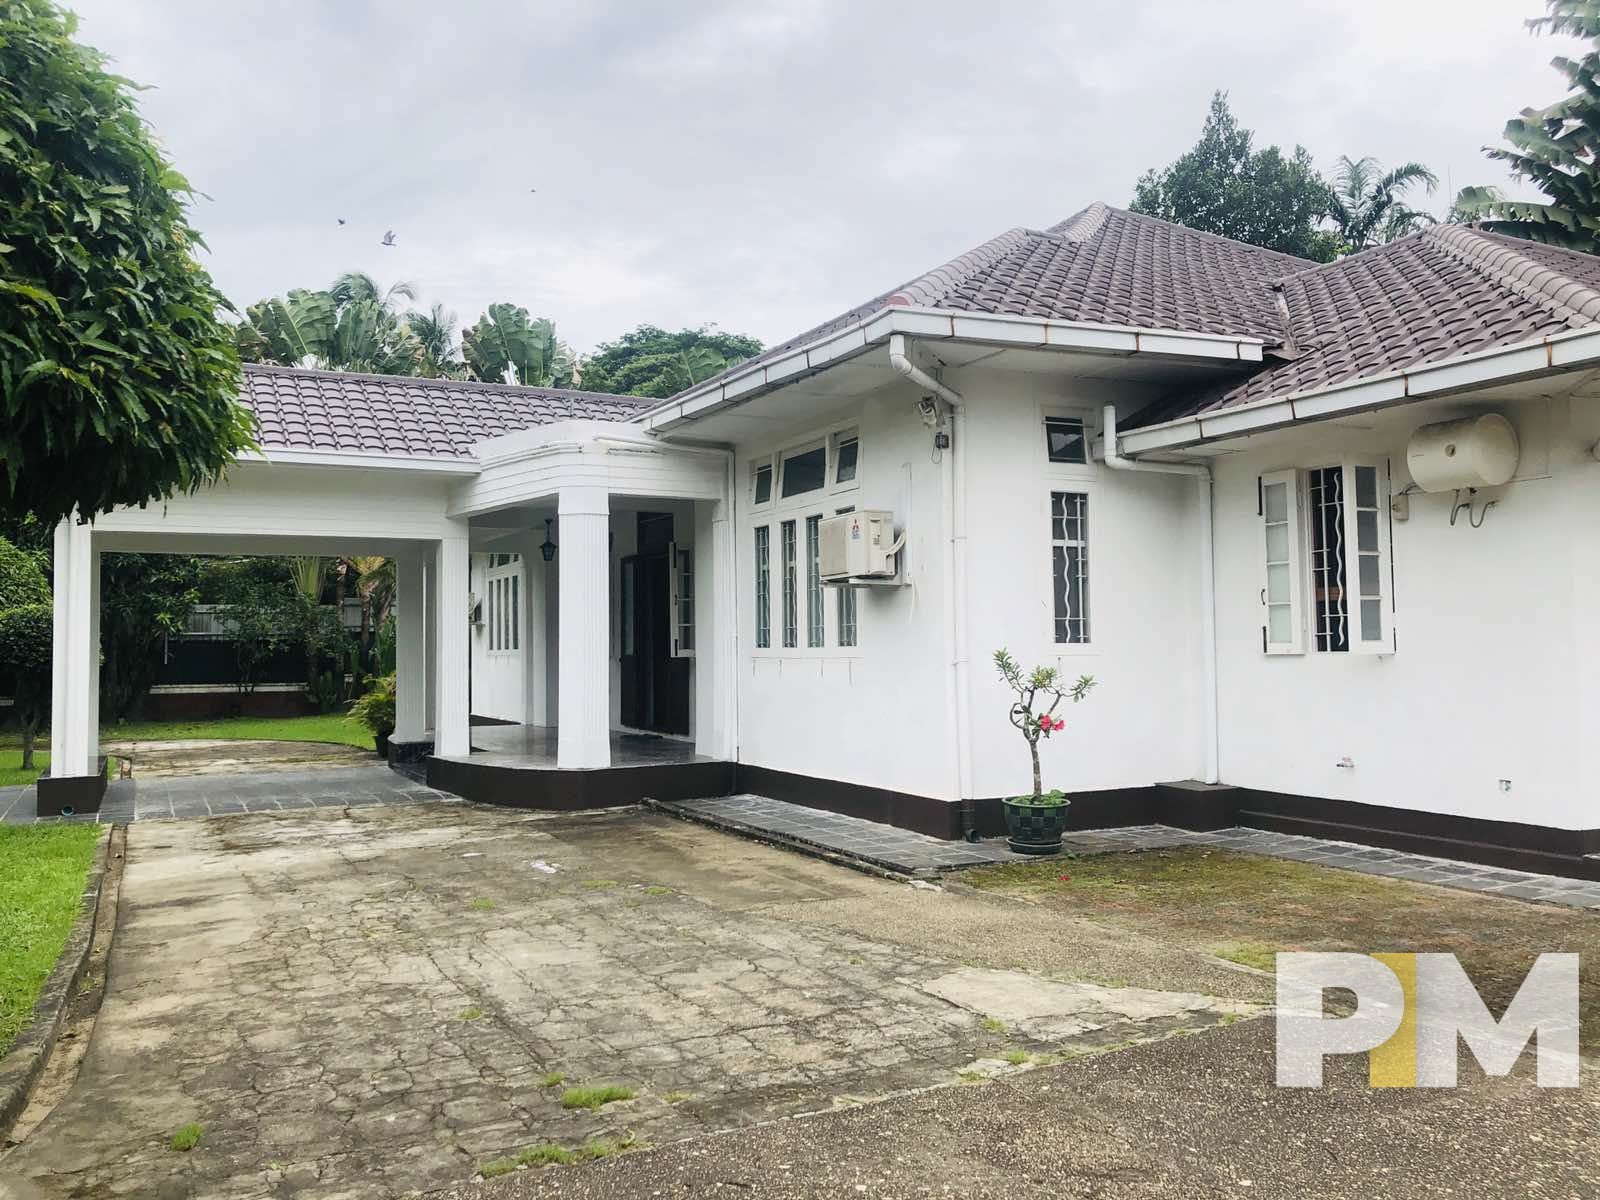 outdoor with drive way - property in Yangon